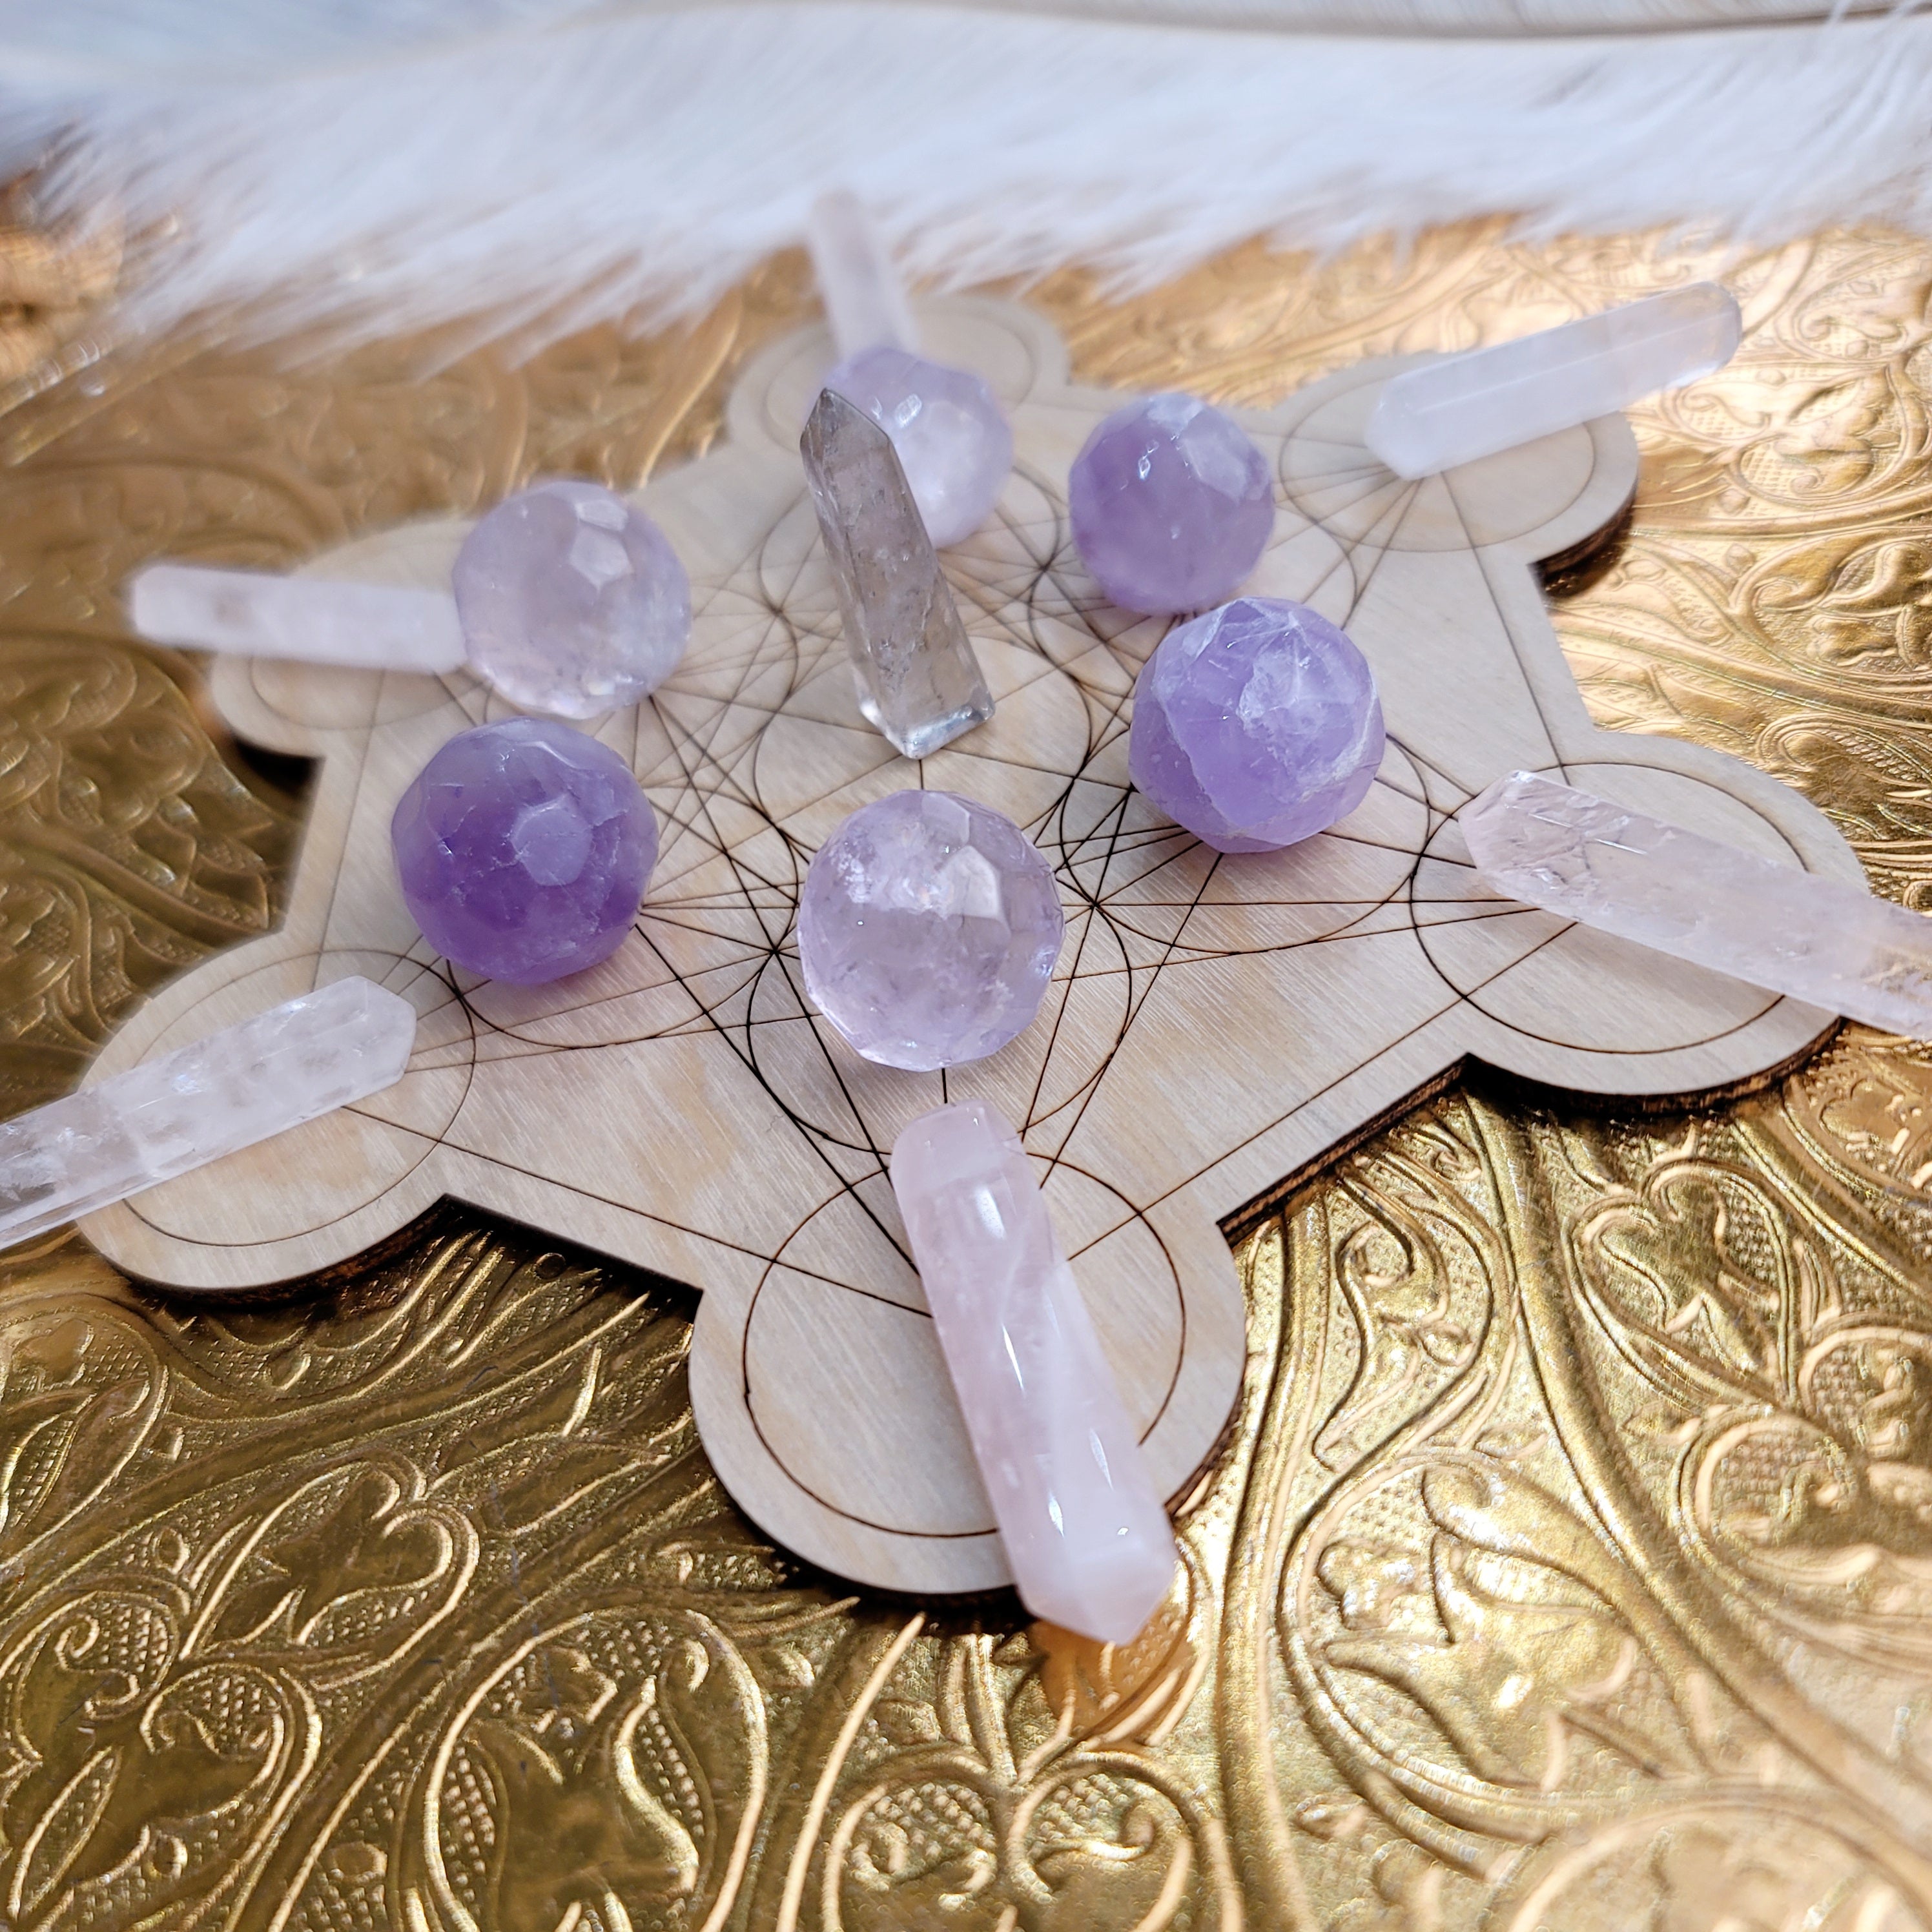 Energy Protection Manifesting Crystal Grid with Rose Quartz and Amethyst for Manifesting, Goddess Vitality Energy and Purifying your Aura